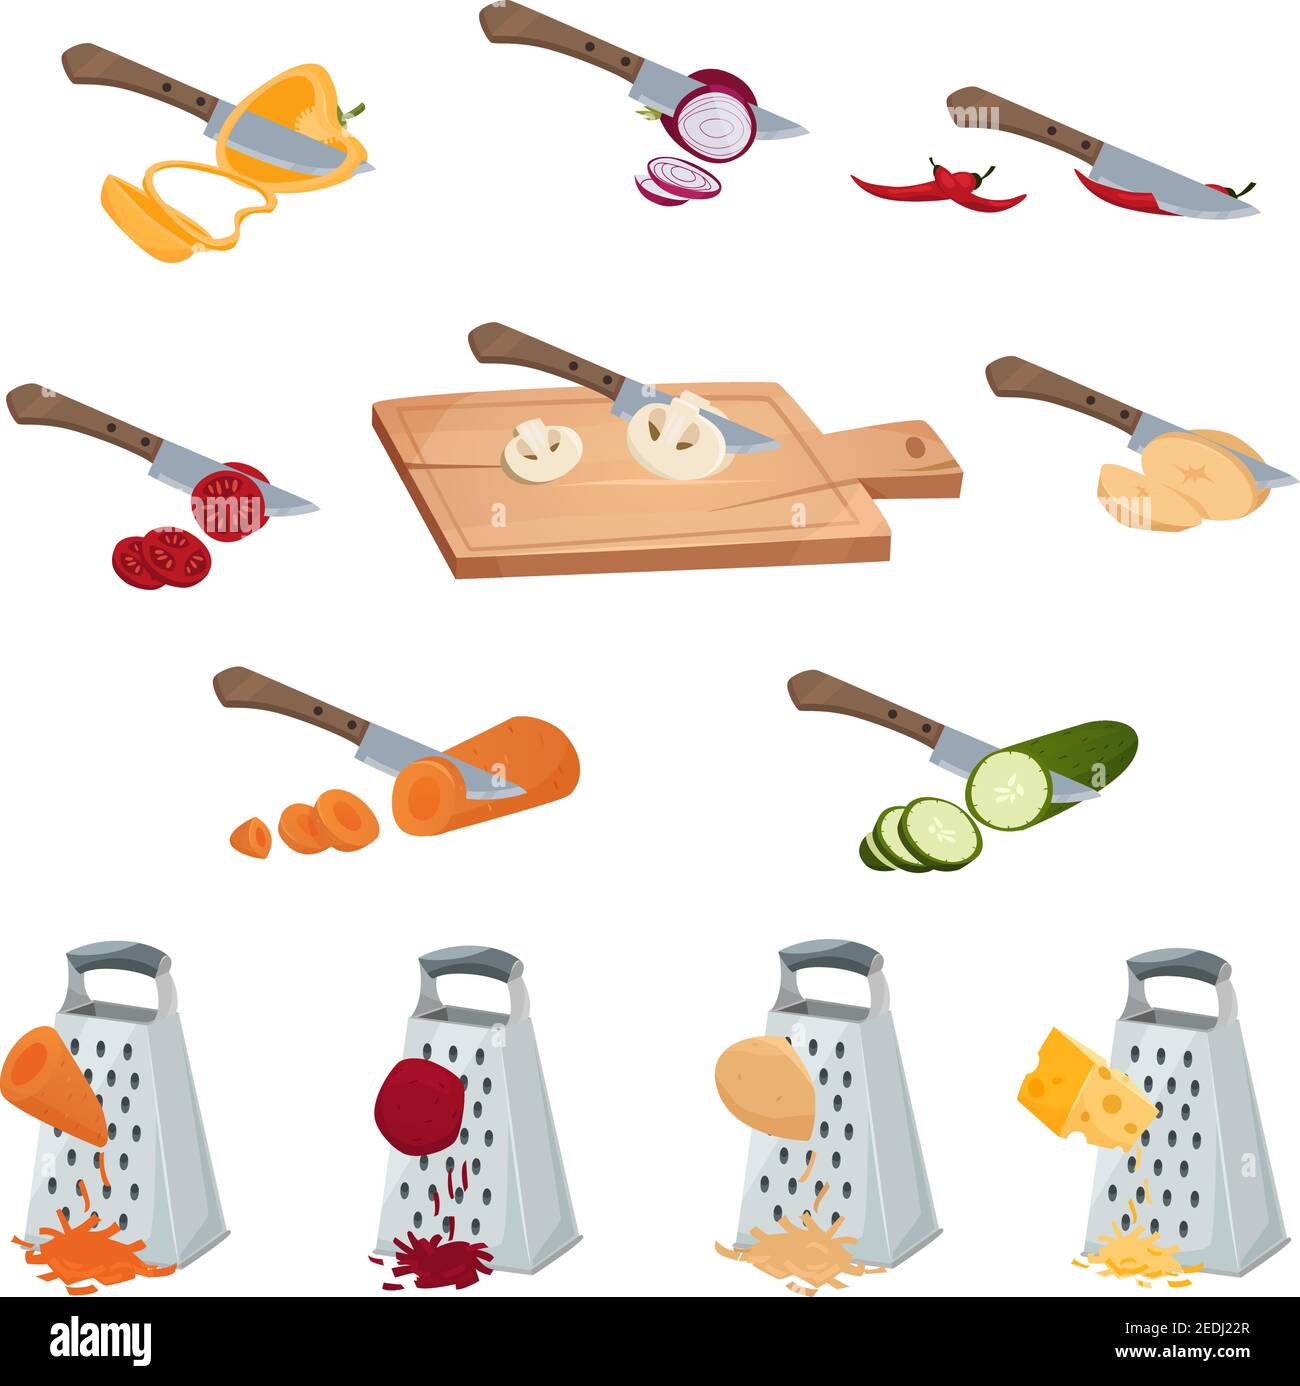 Vegetables preparing set of tools for chopping cutting by knife and grater isolated vector illustration Stock Vector